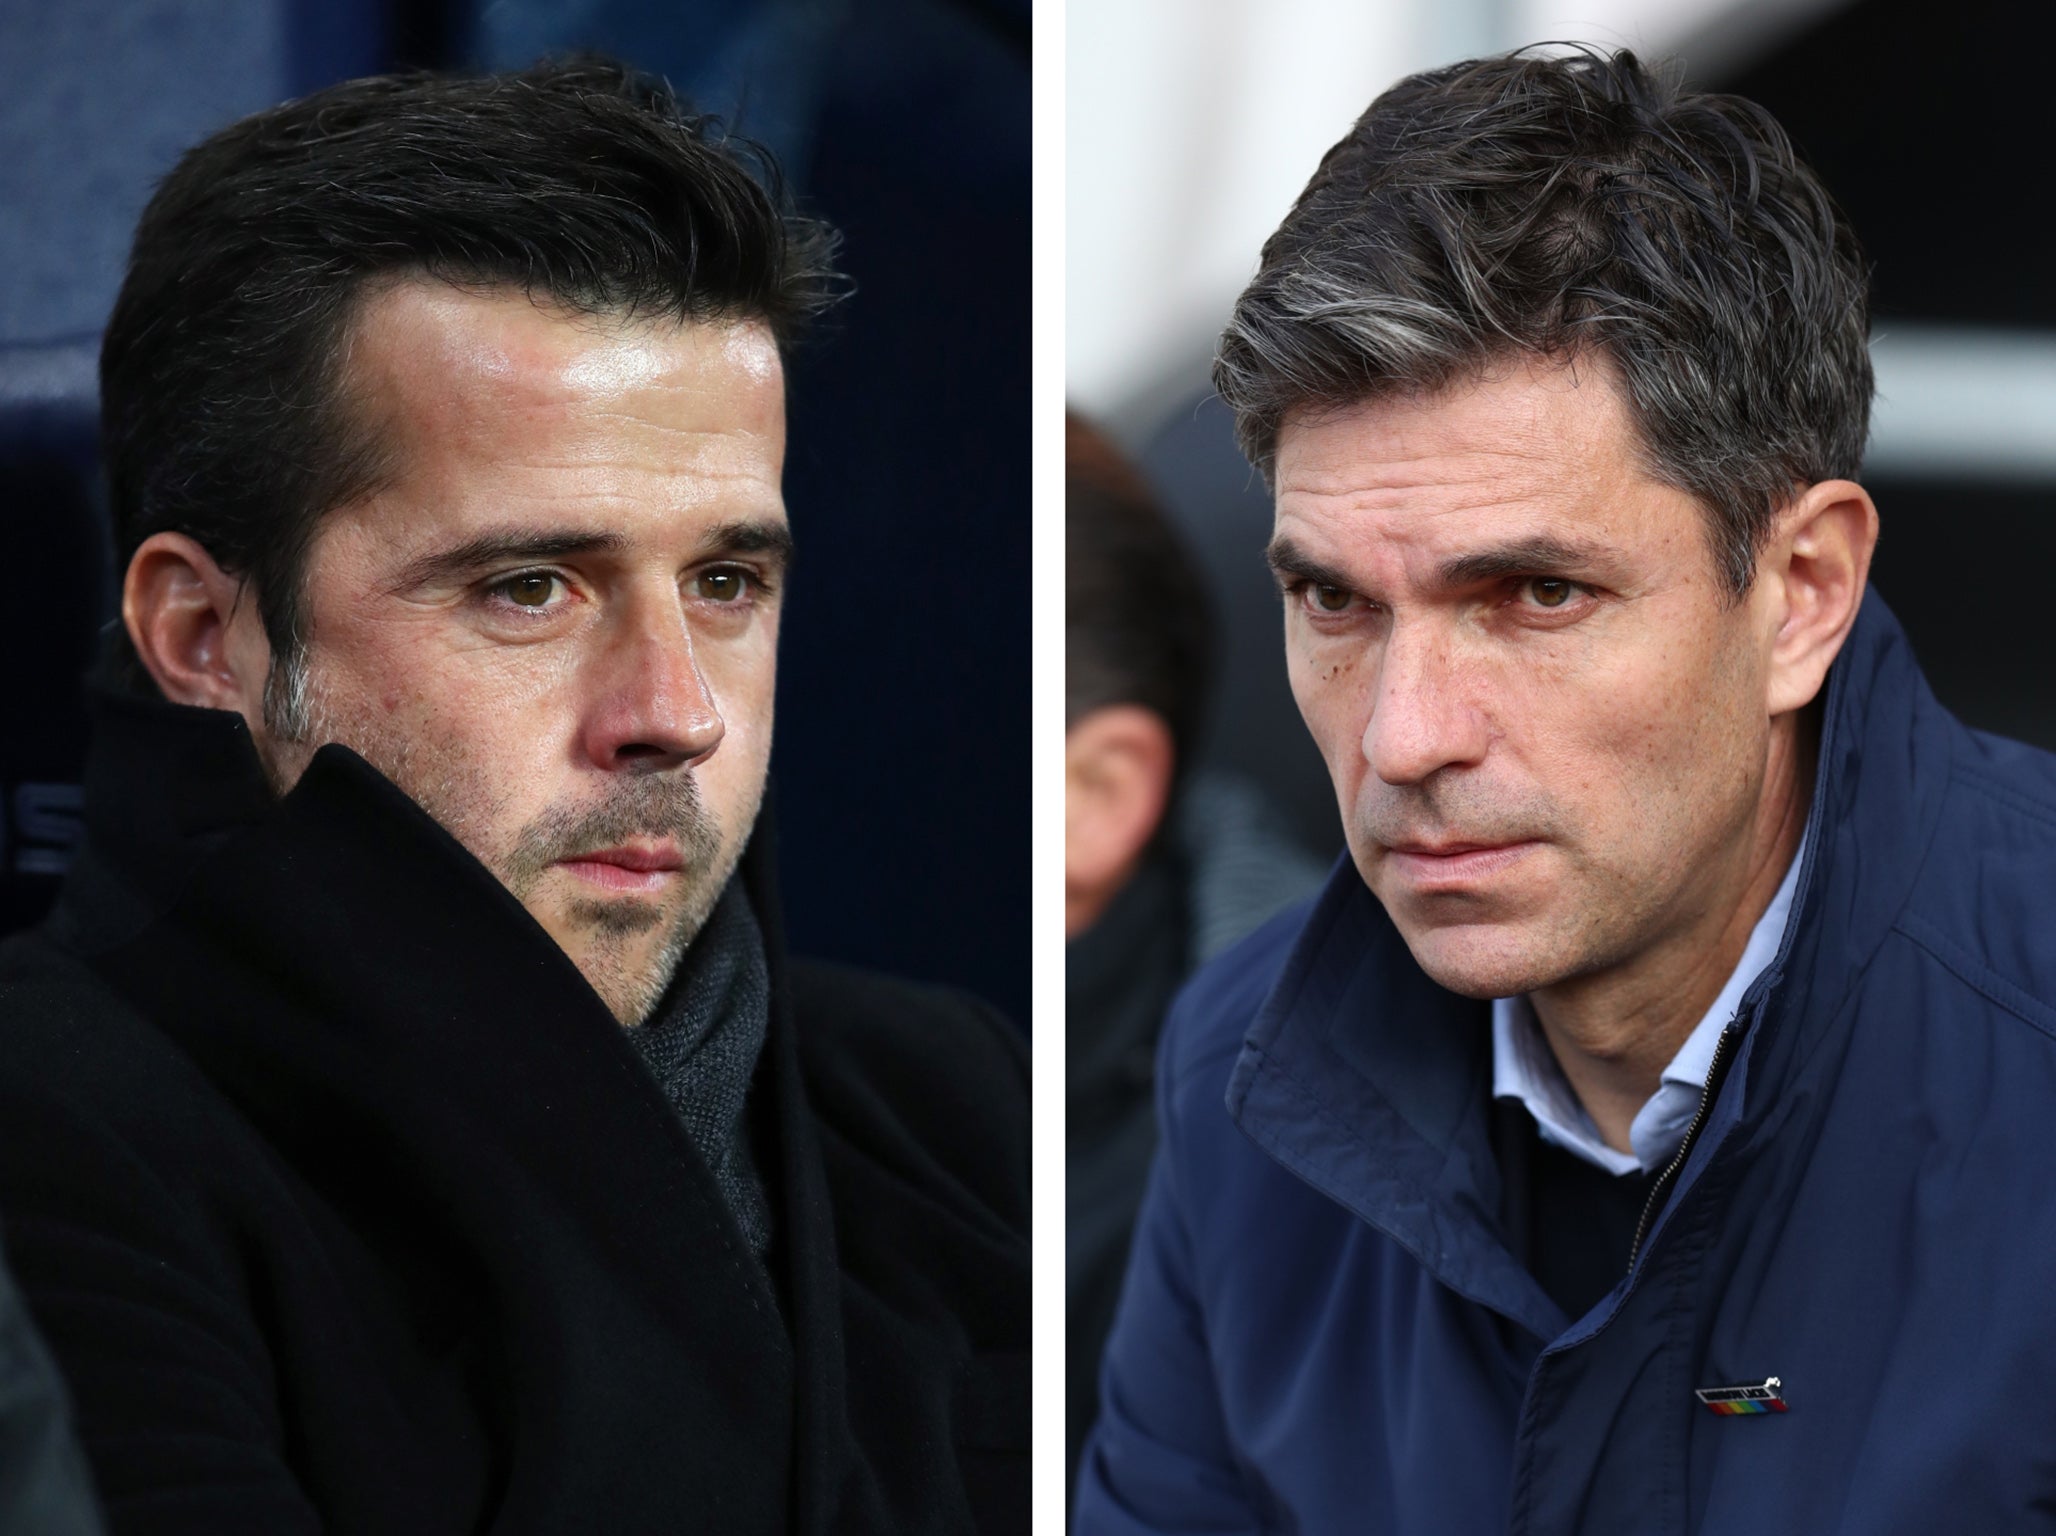 Marco Silva and Mauricio Pellegrino are two managers under scrutiny